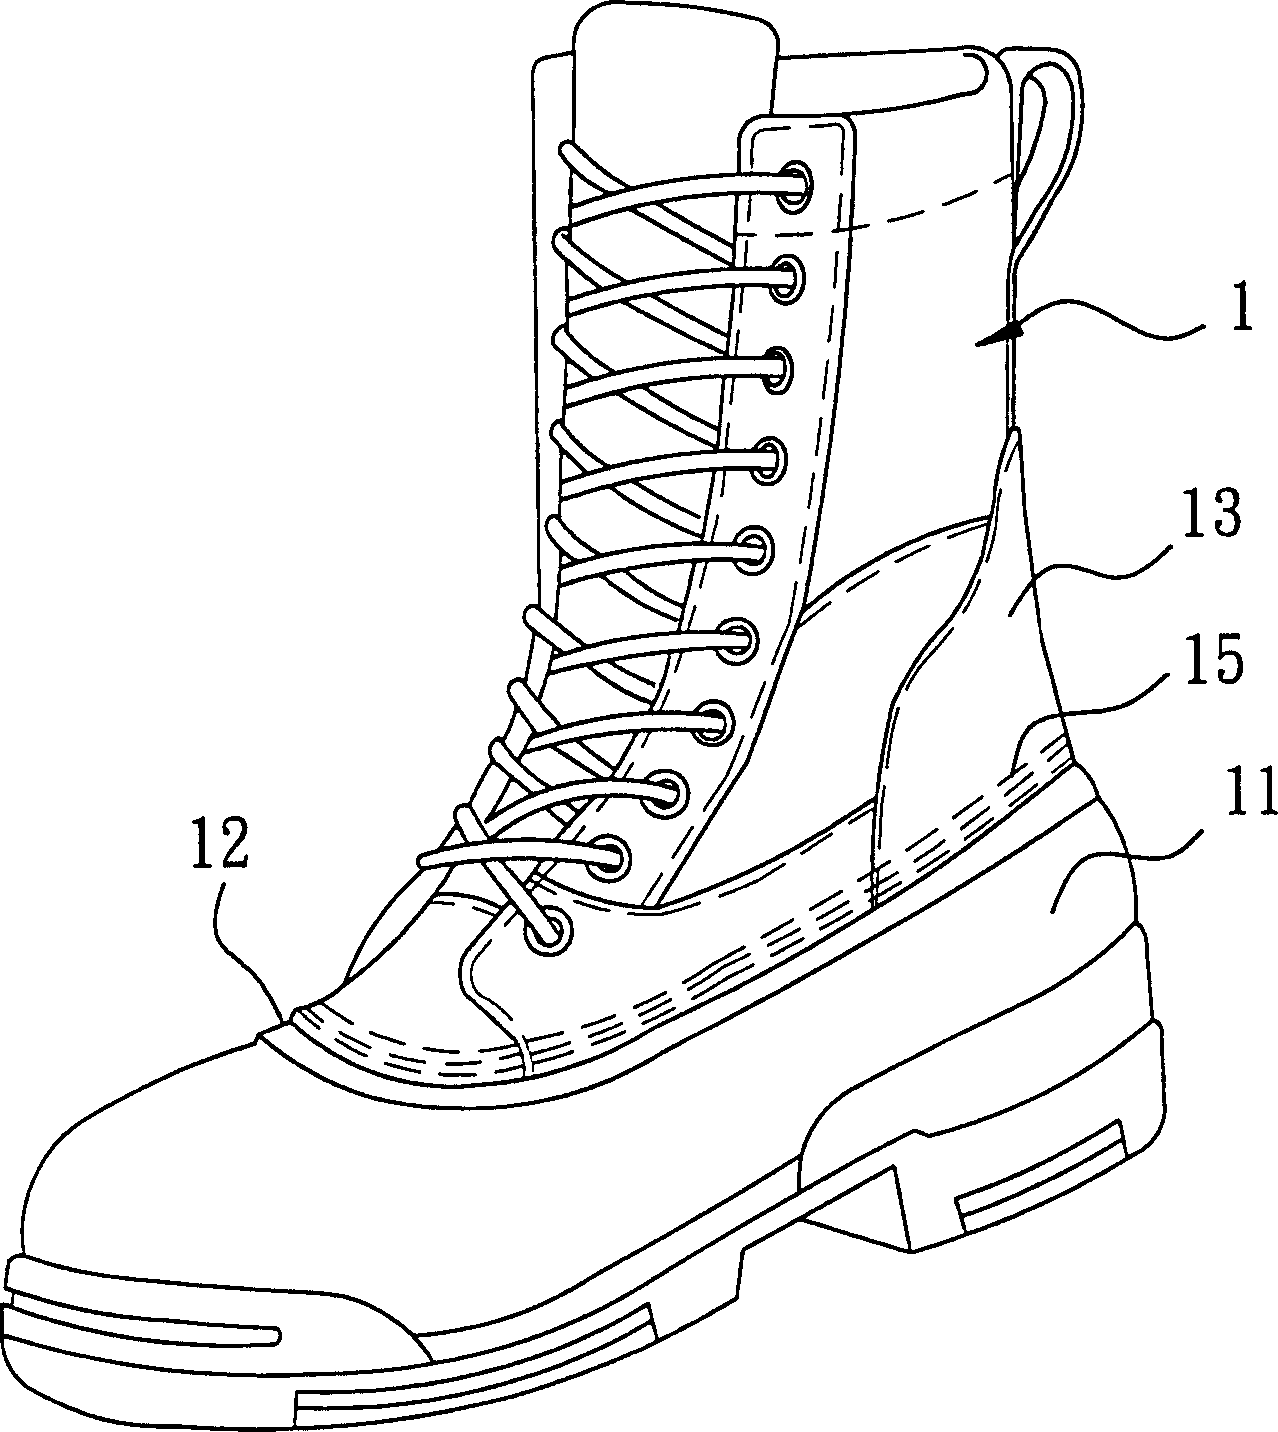 Waterproof shoes and boots and its manufacturing method